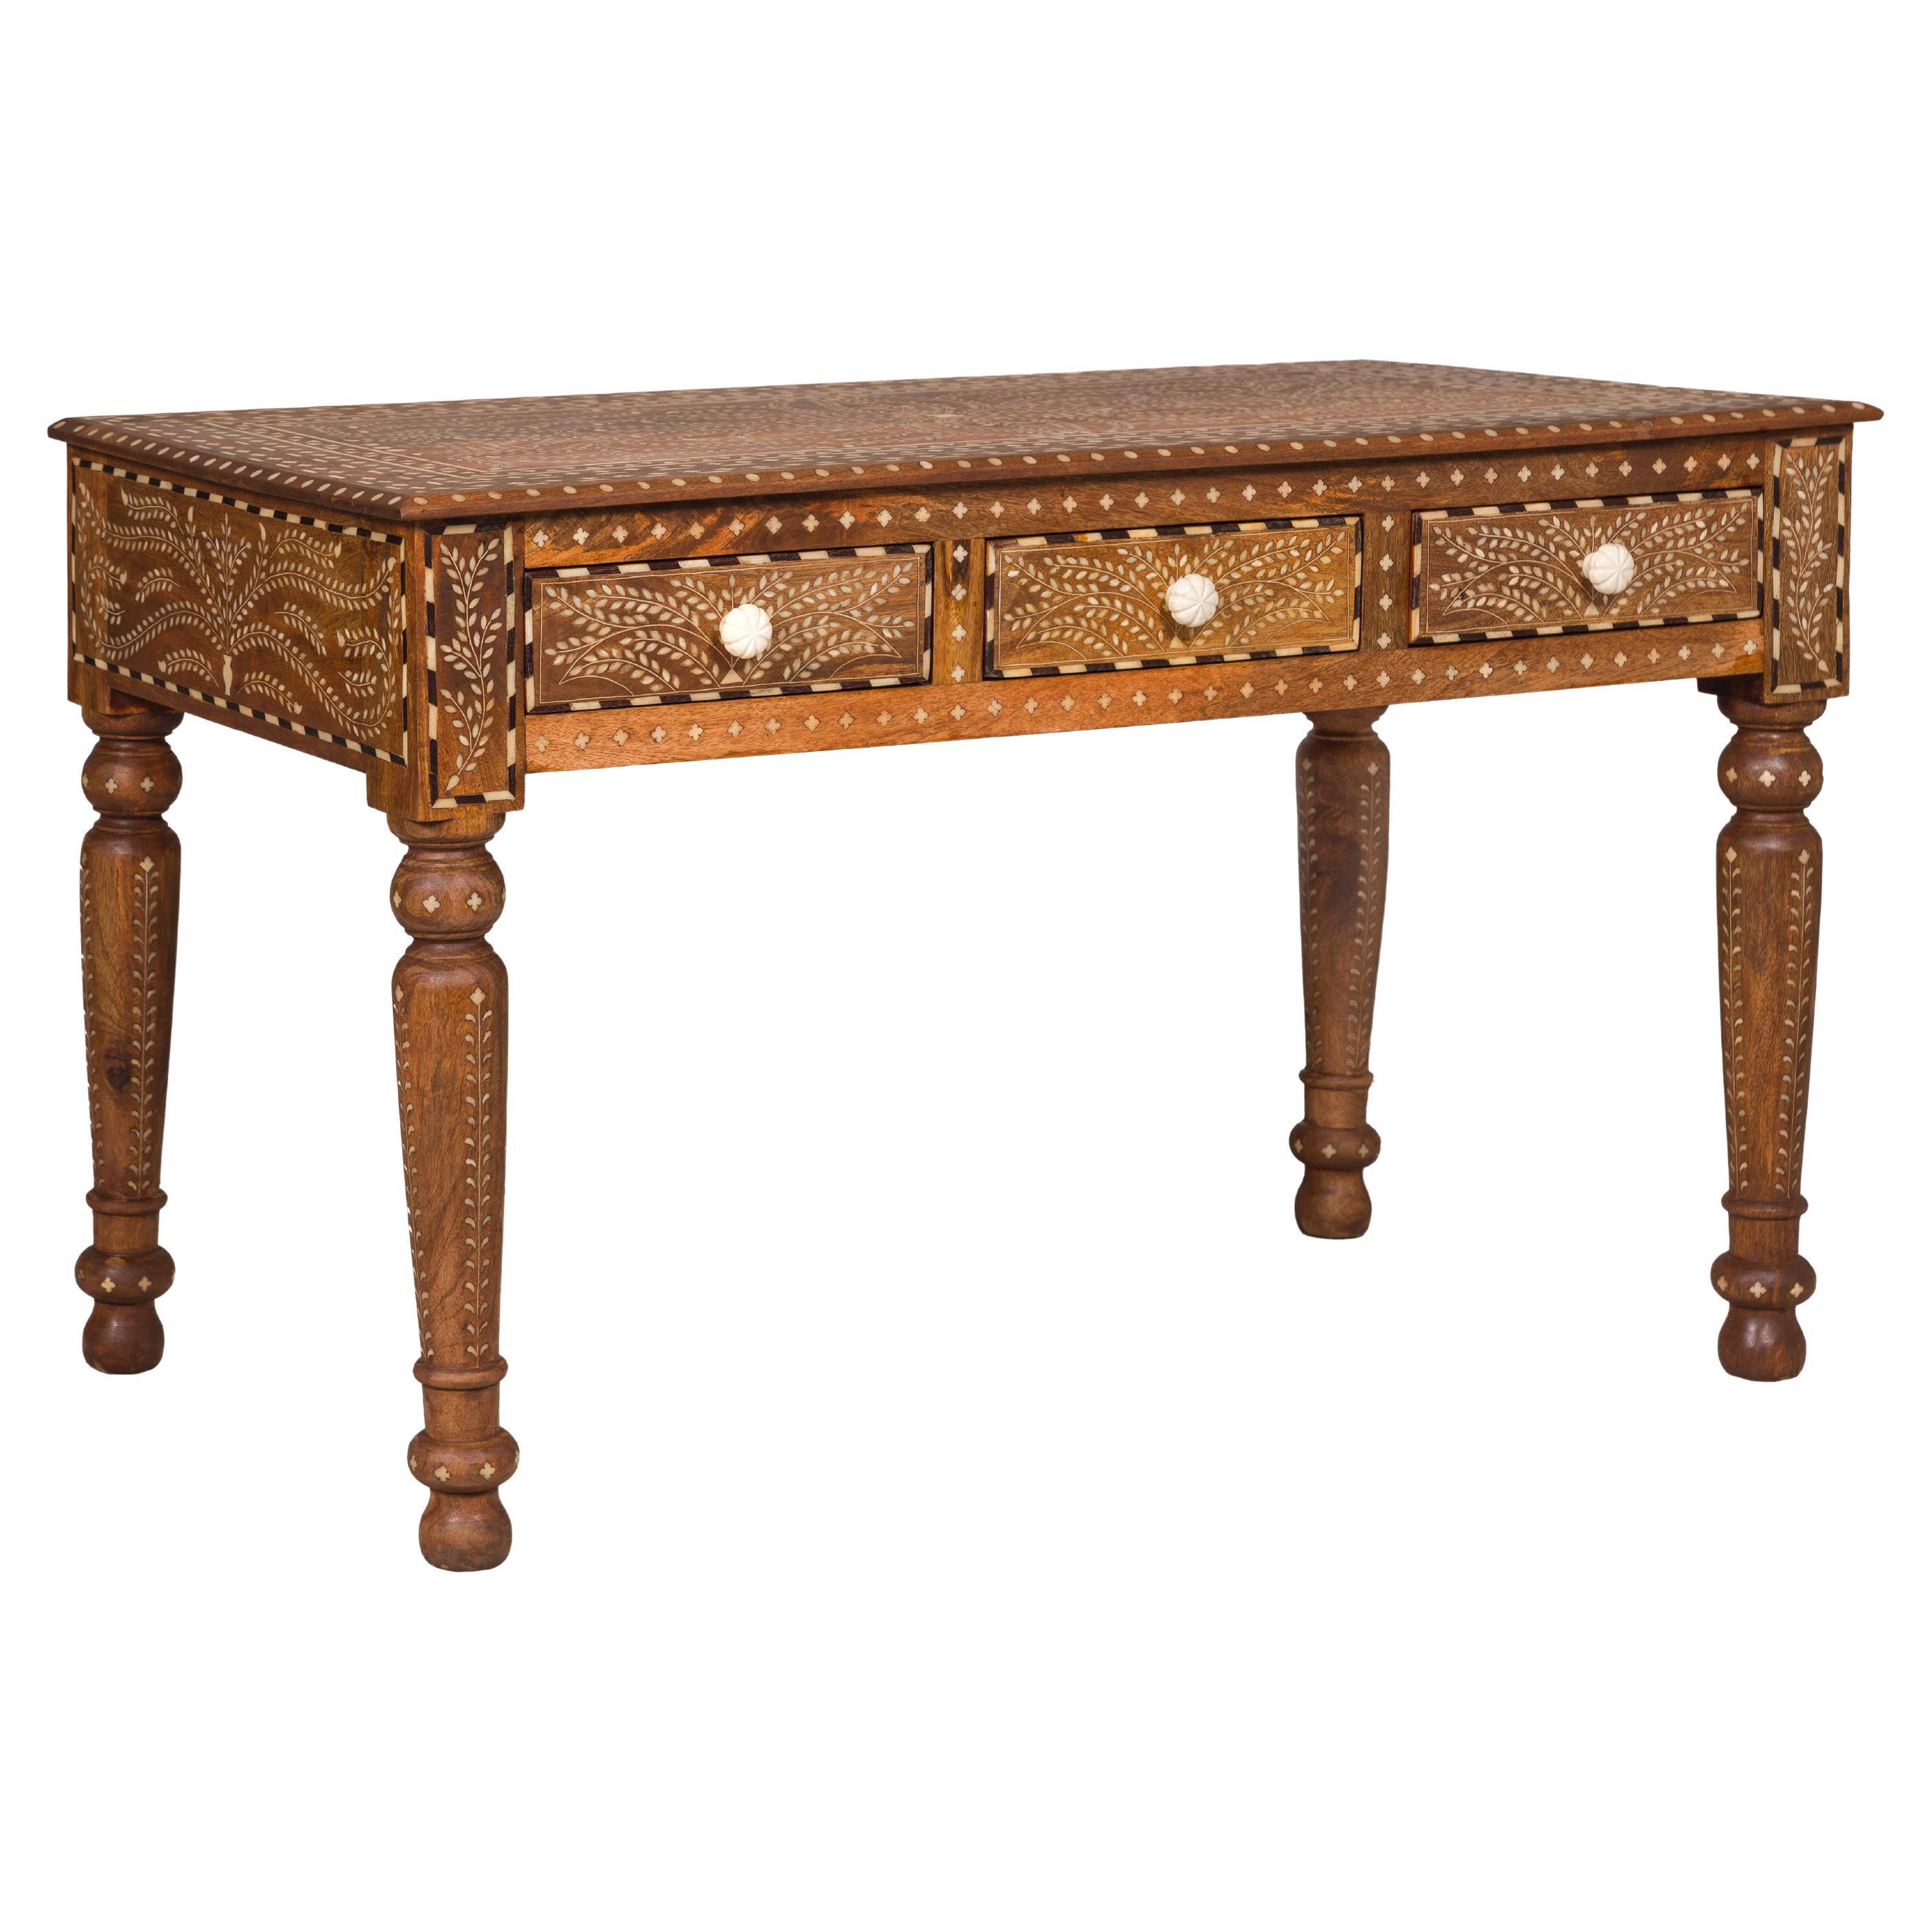 Anglo Indian Style Mango Wood Console or Desk with Three Drawers and Bone Inlay